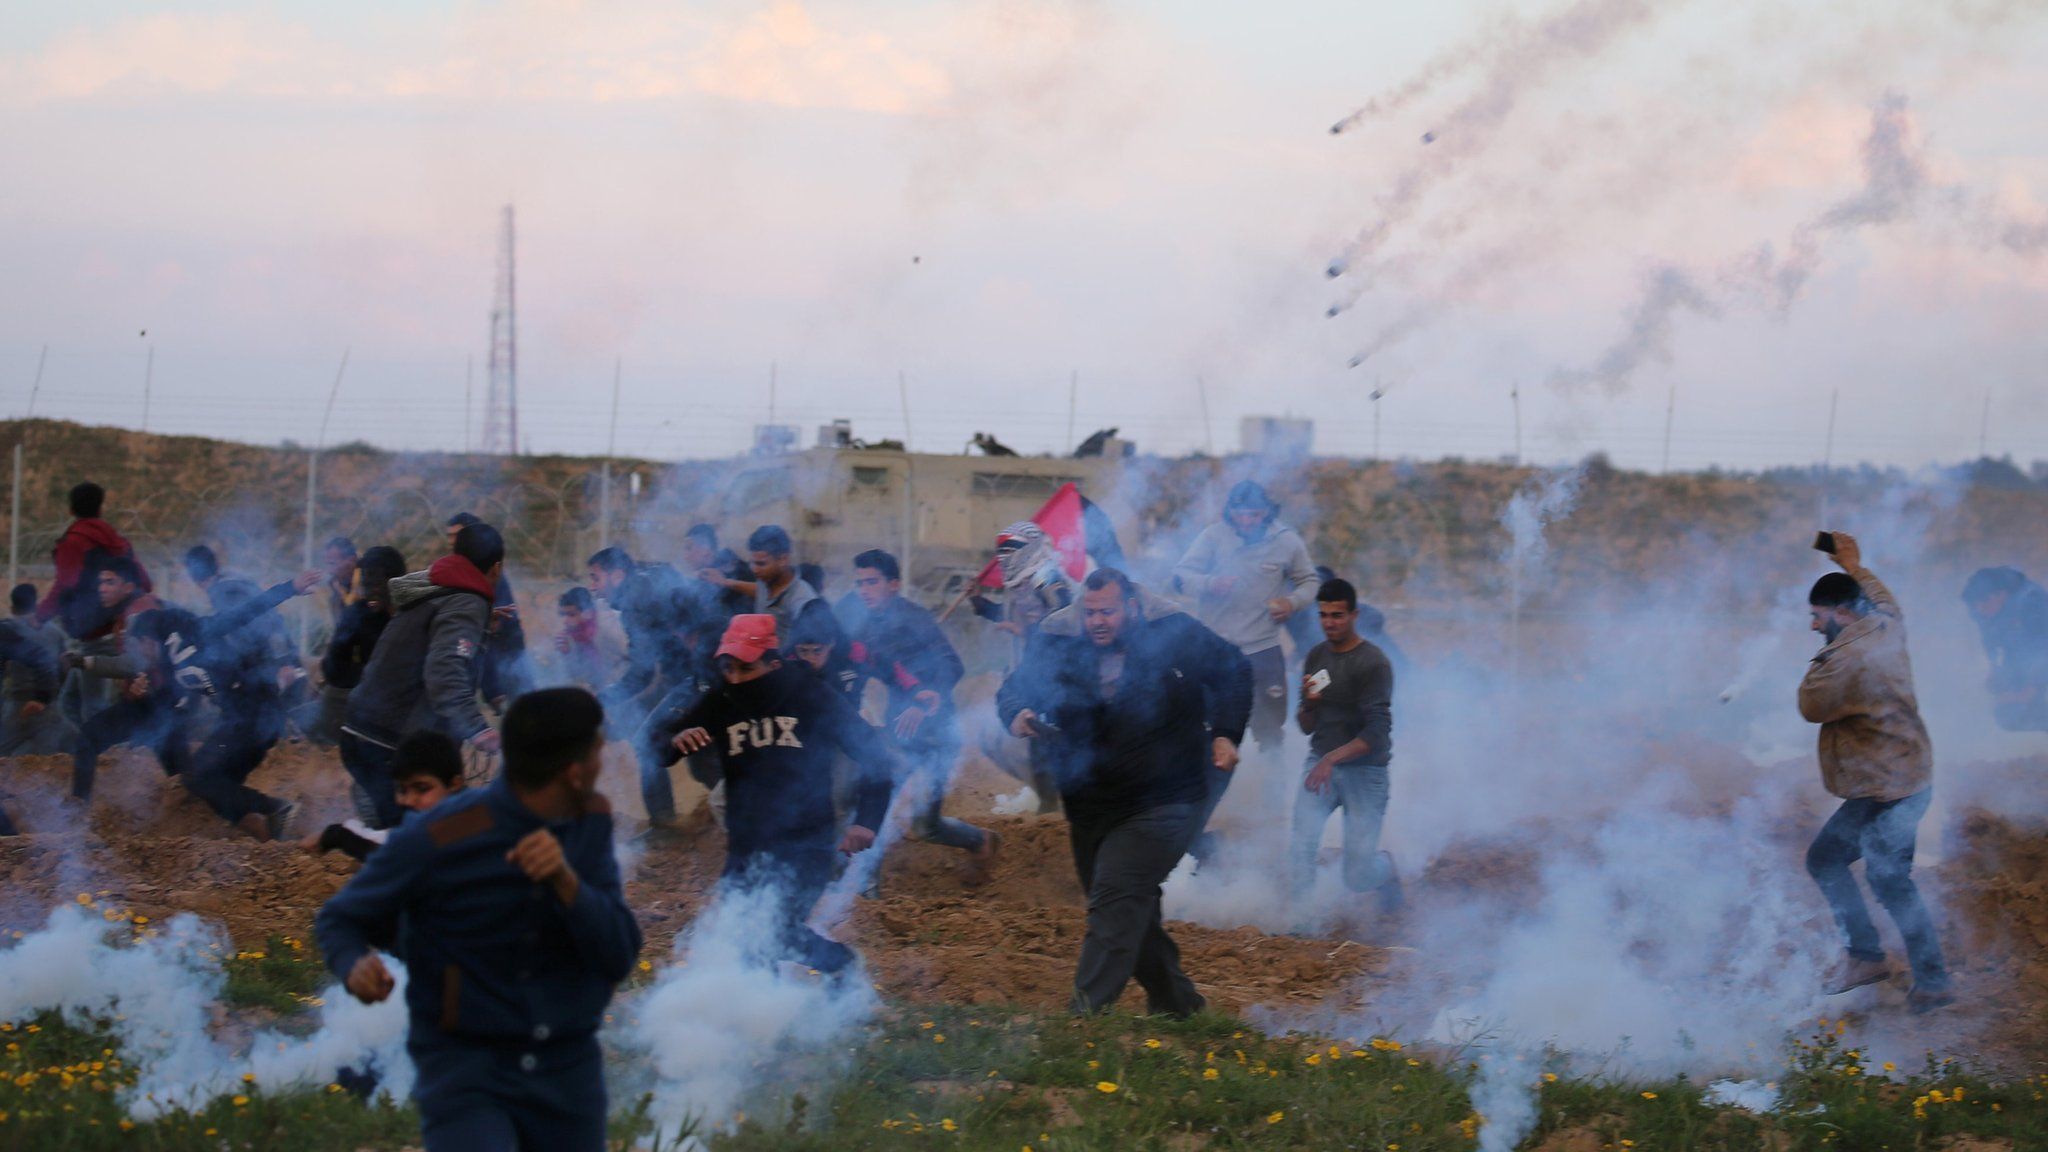 Tear-gas canisters fired by Israeli troops towards Palestinians during a protest on the Gaza-Israel border fence in the southern Gaza Strip on 22 February 2019